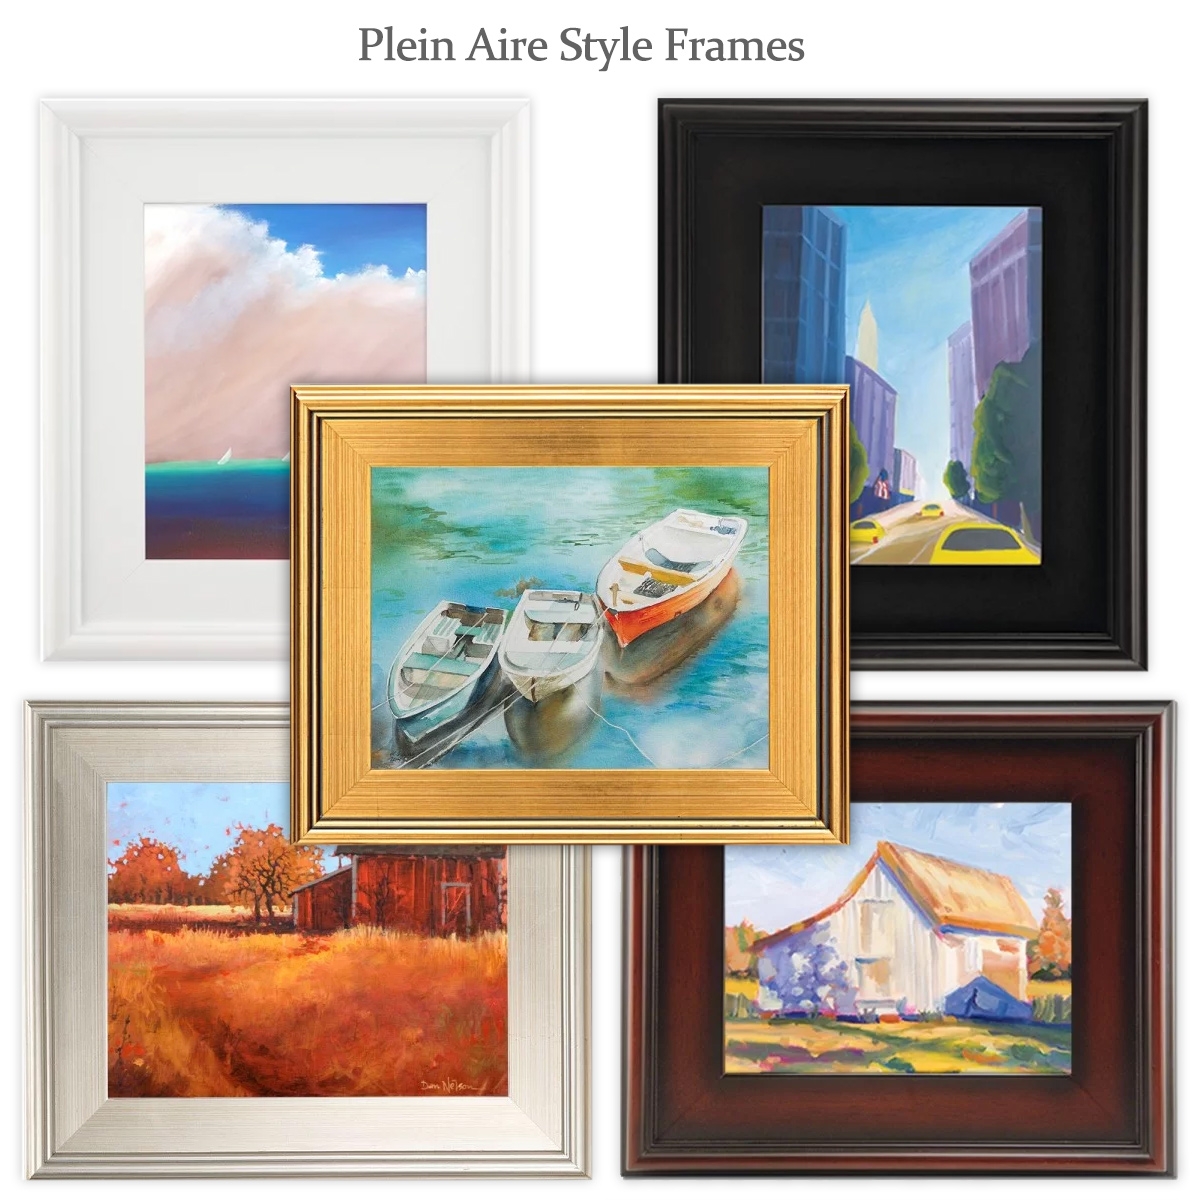  Illusions Floater Canvas Frames 1-1/2 Deep